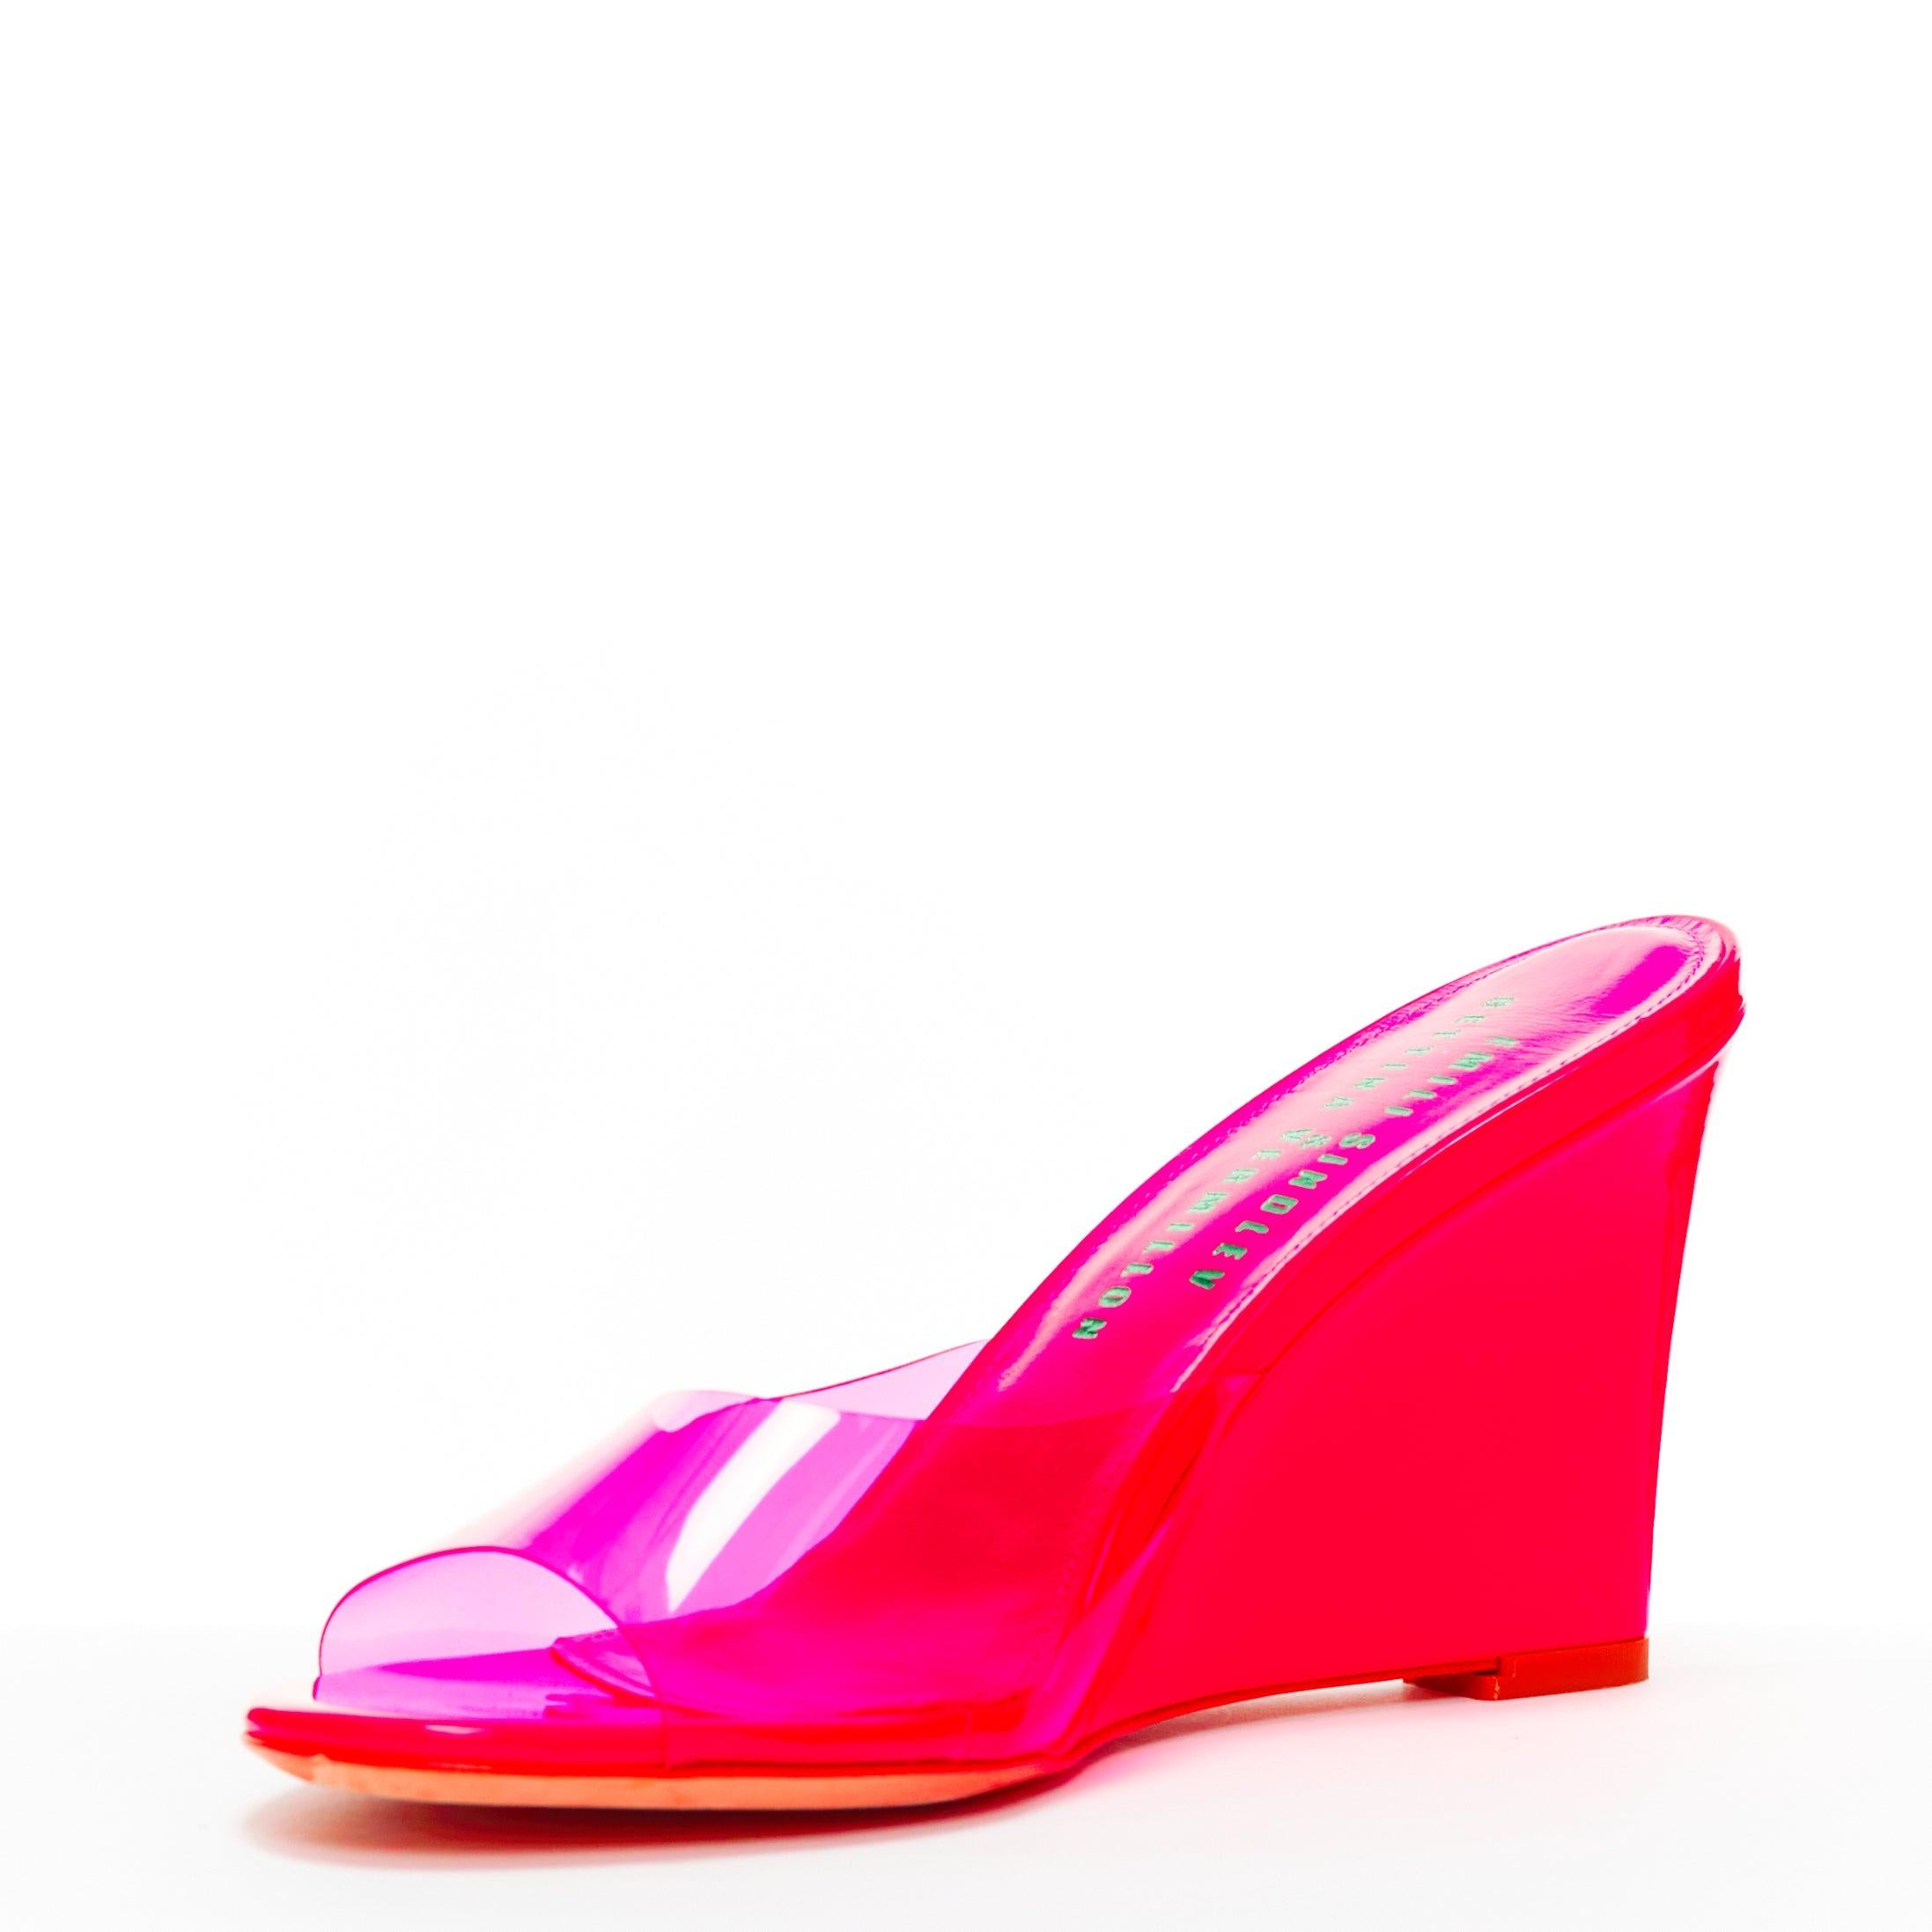 BETTINA VERMILLON Emili Sindlev Britney hot pink PVC wedge mules EU37.5 In Excellent Condition For Sale In Hong Kong, NT